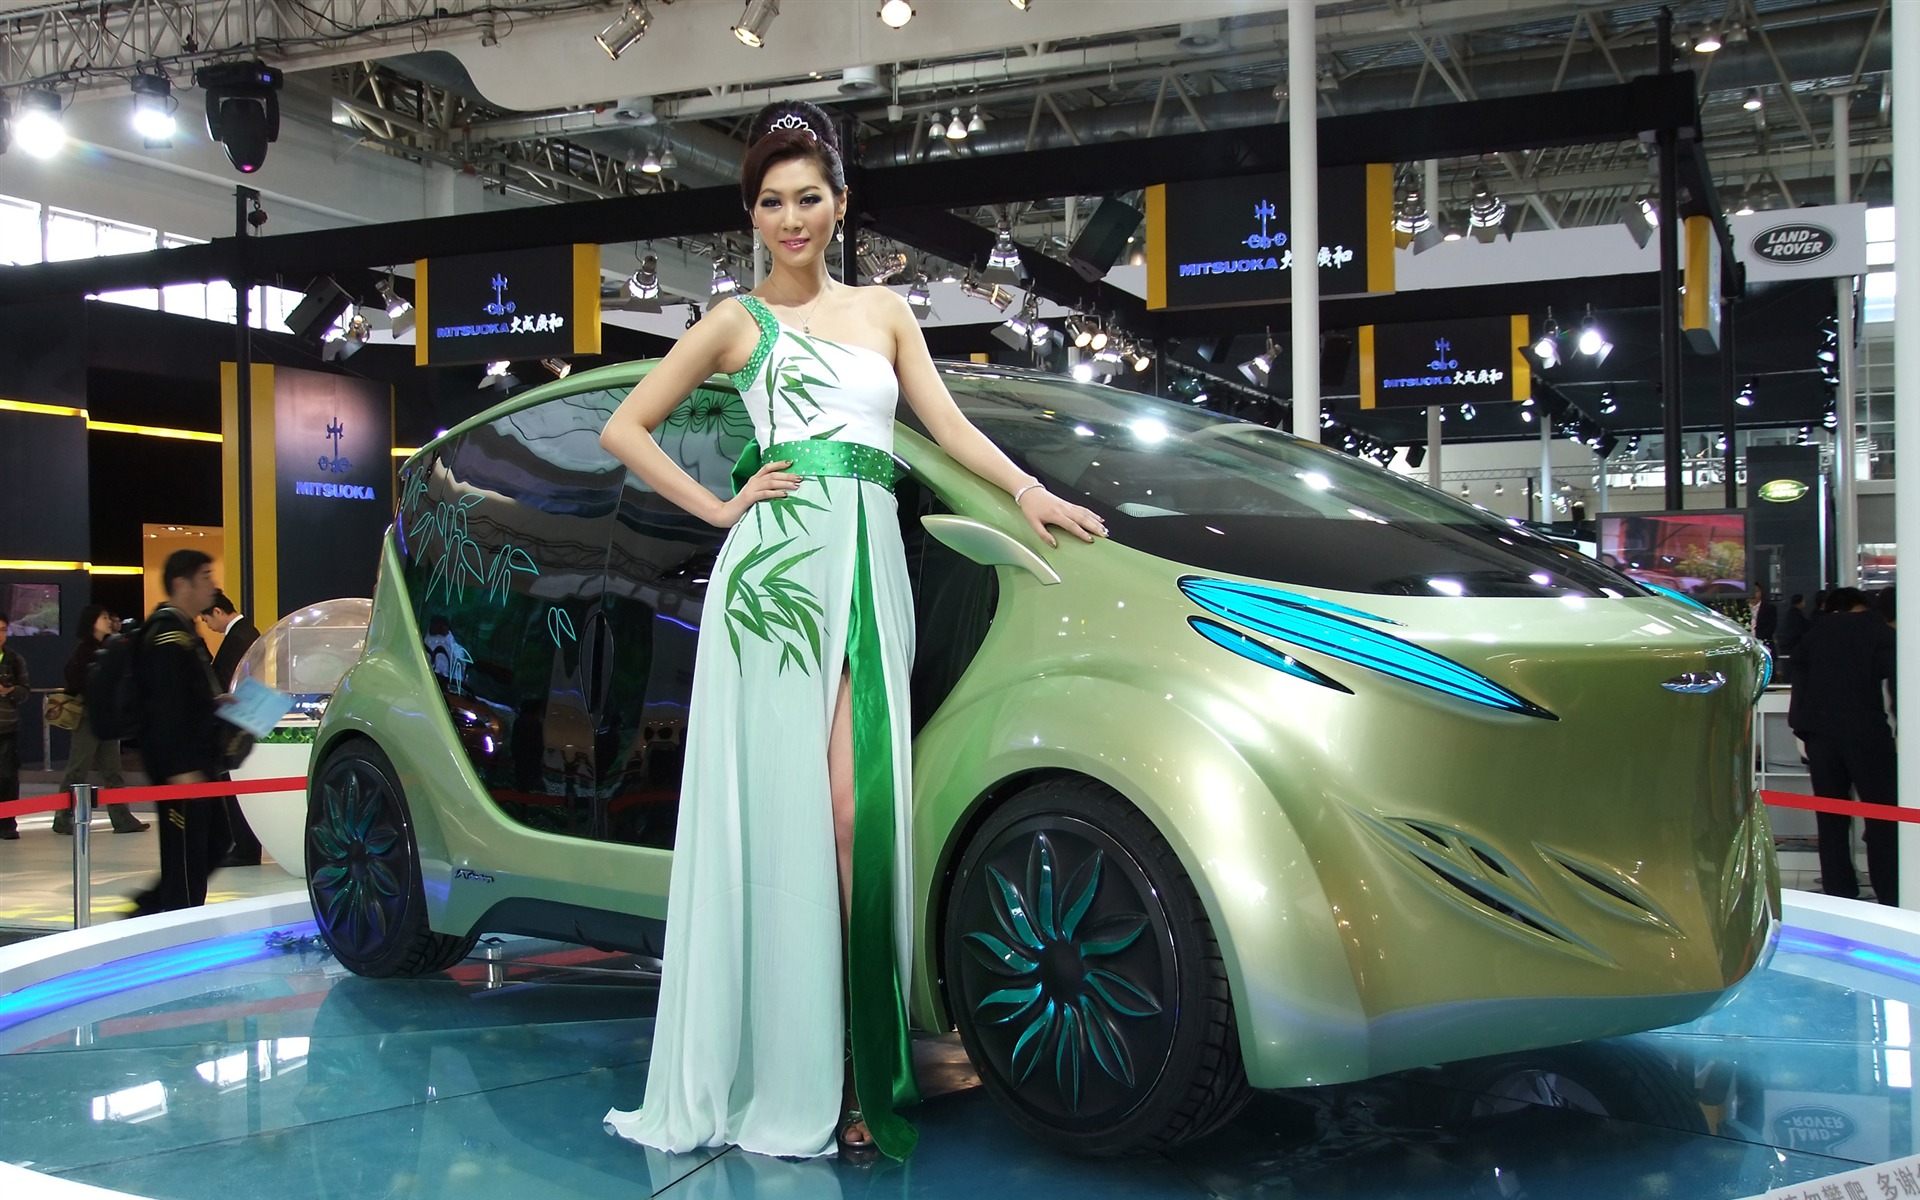 2010 Beijing Auto Show car models Collection (2) #2 - 1920x1200